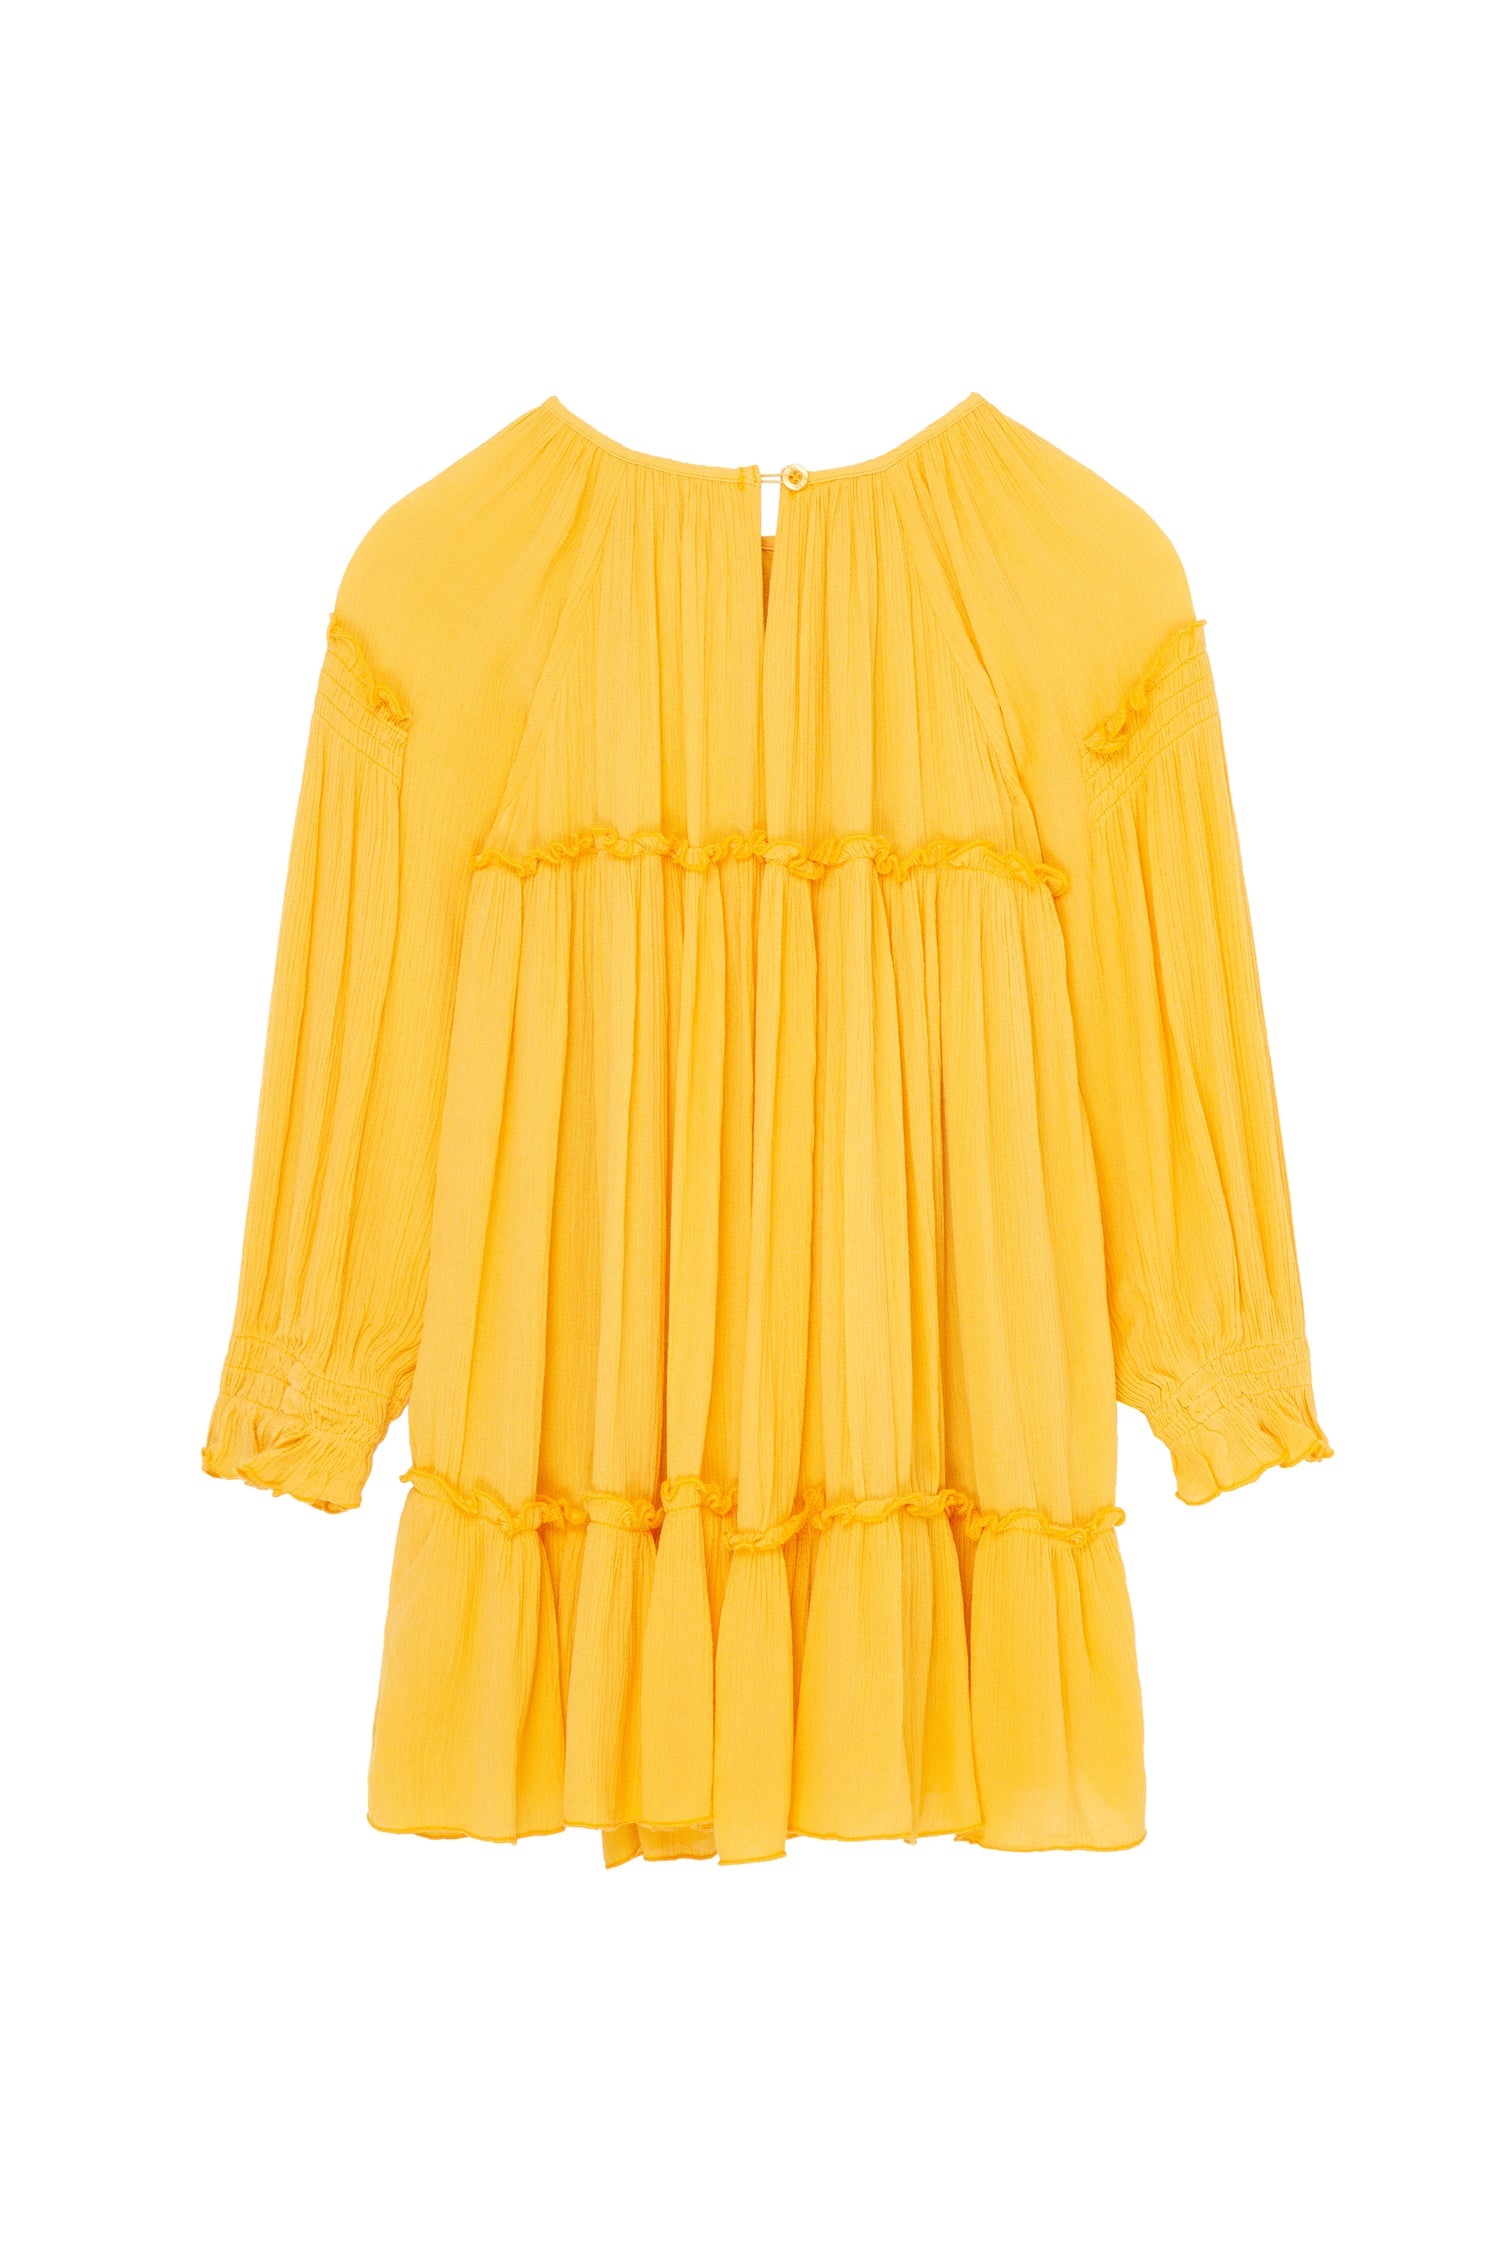 Back view of long sleeve yellow crinkle dress with smocking detailing